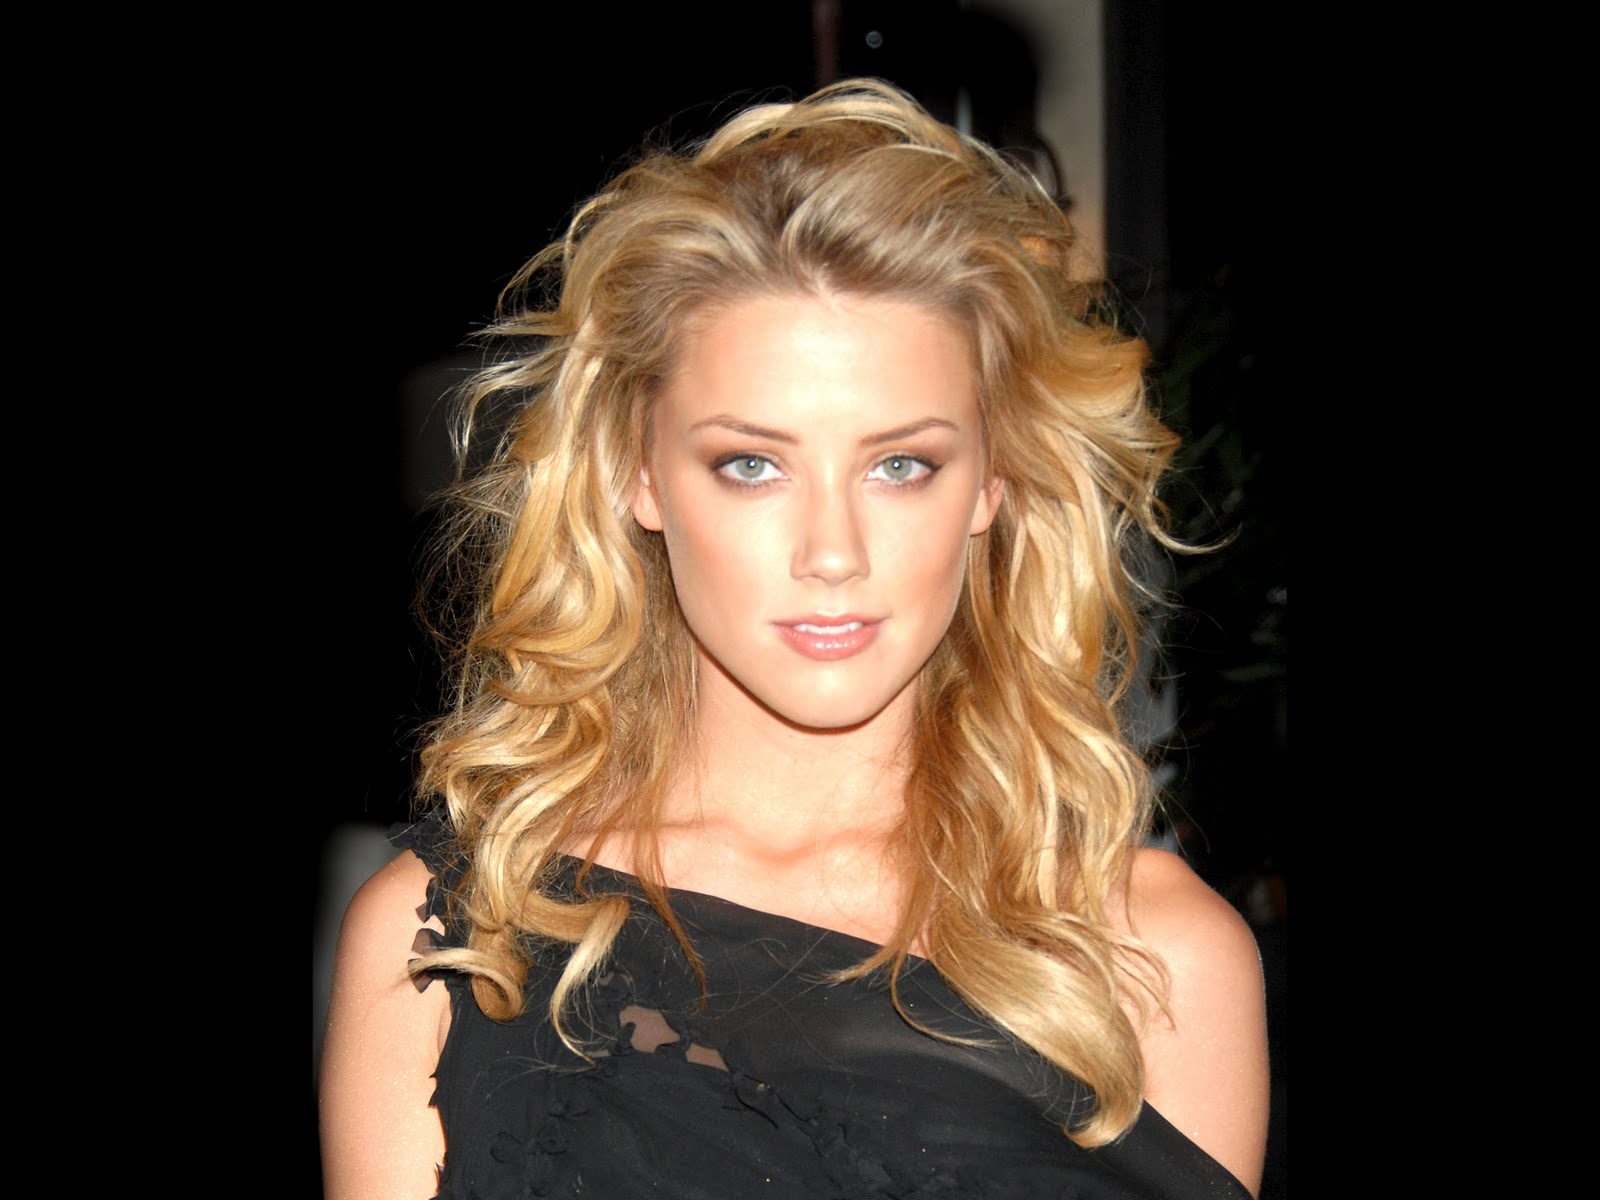 Amber Heard Images, Wallpaper, High Quality Pictures, 